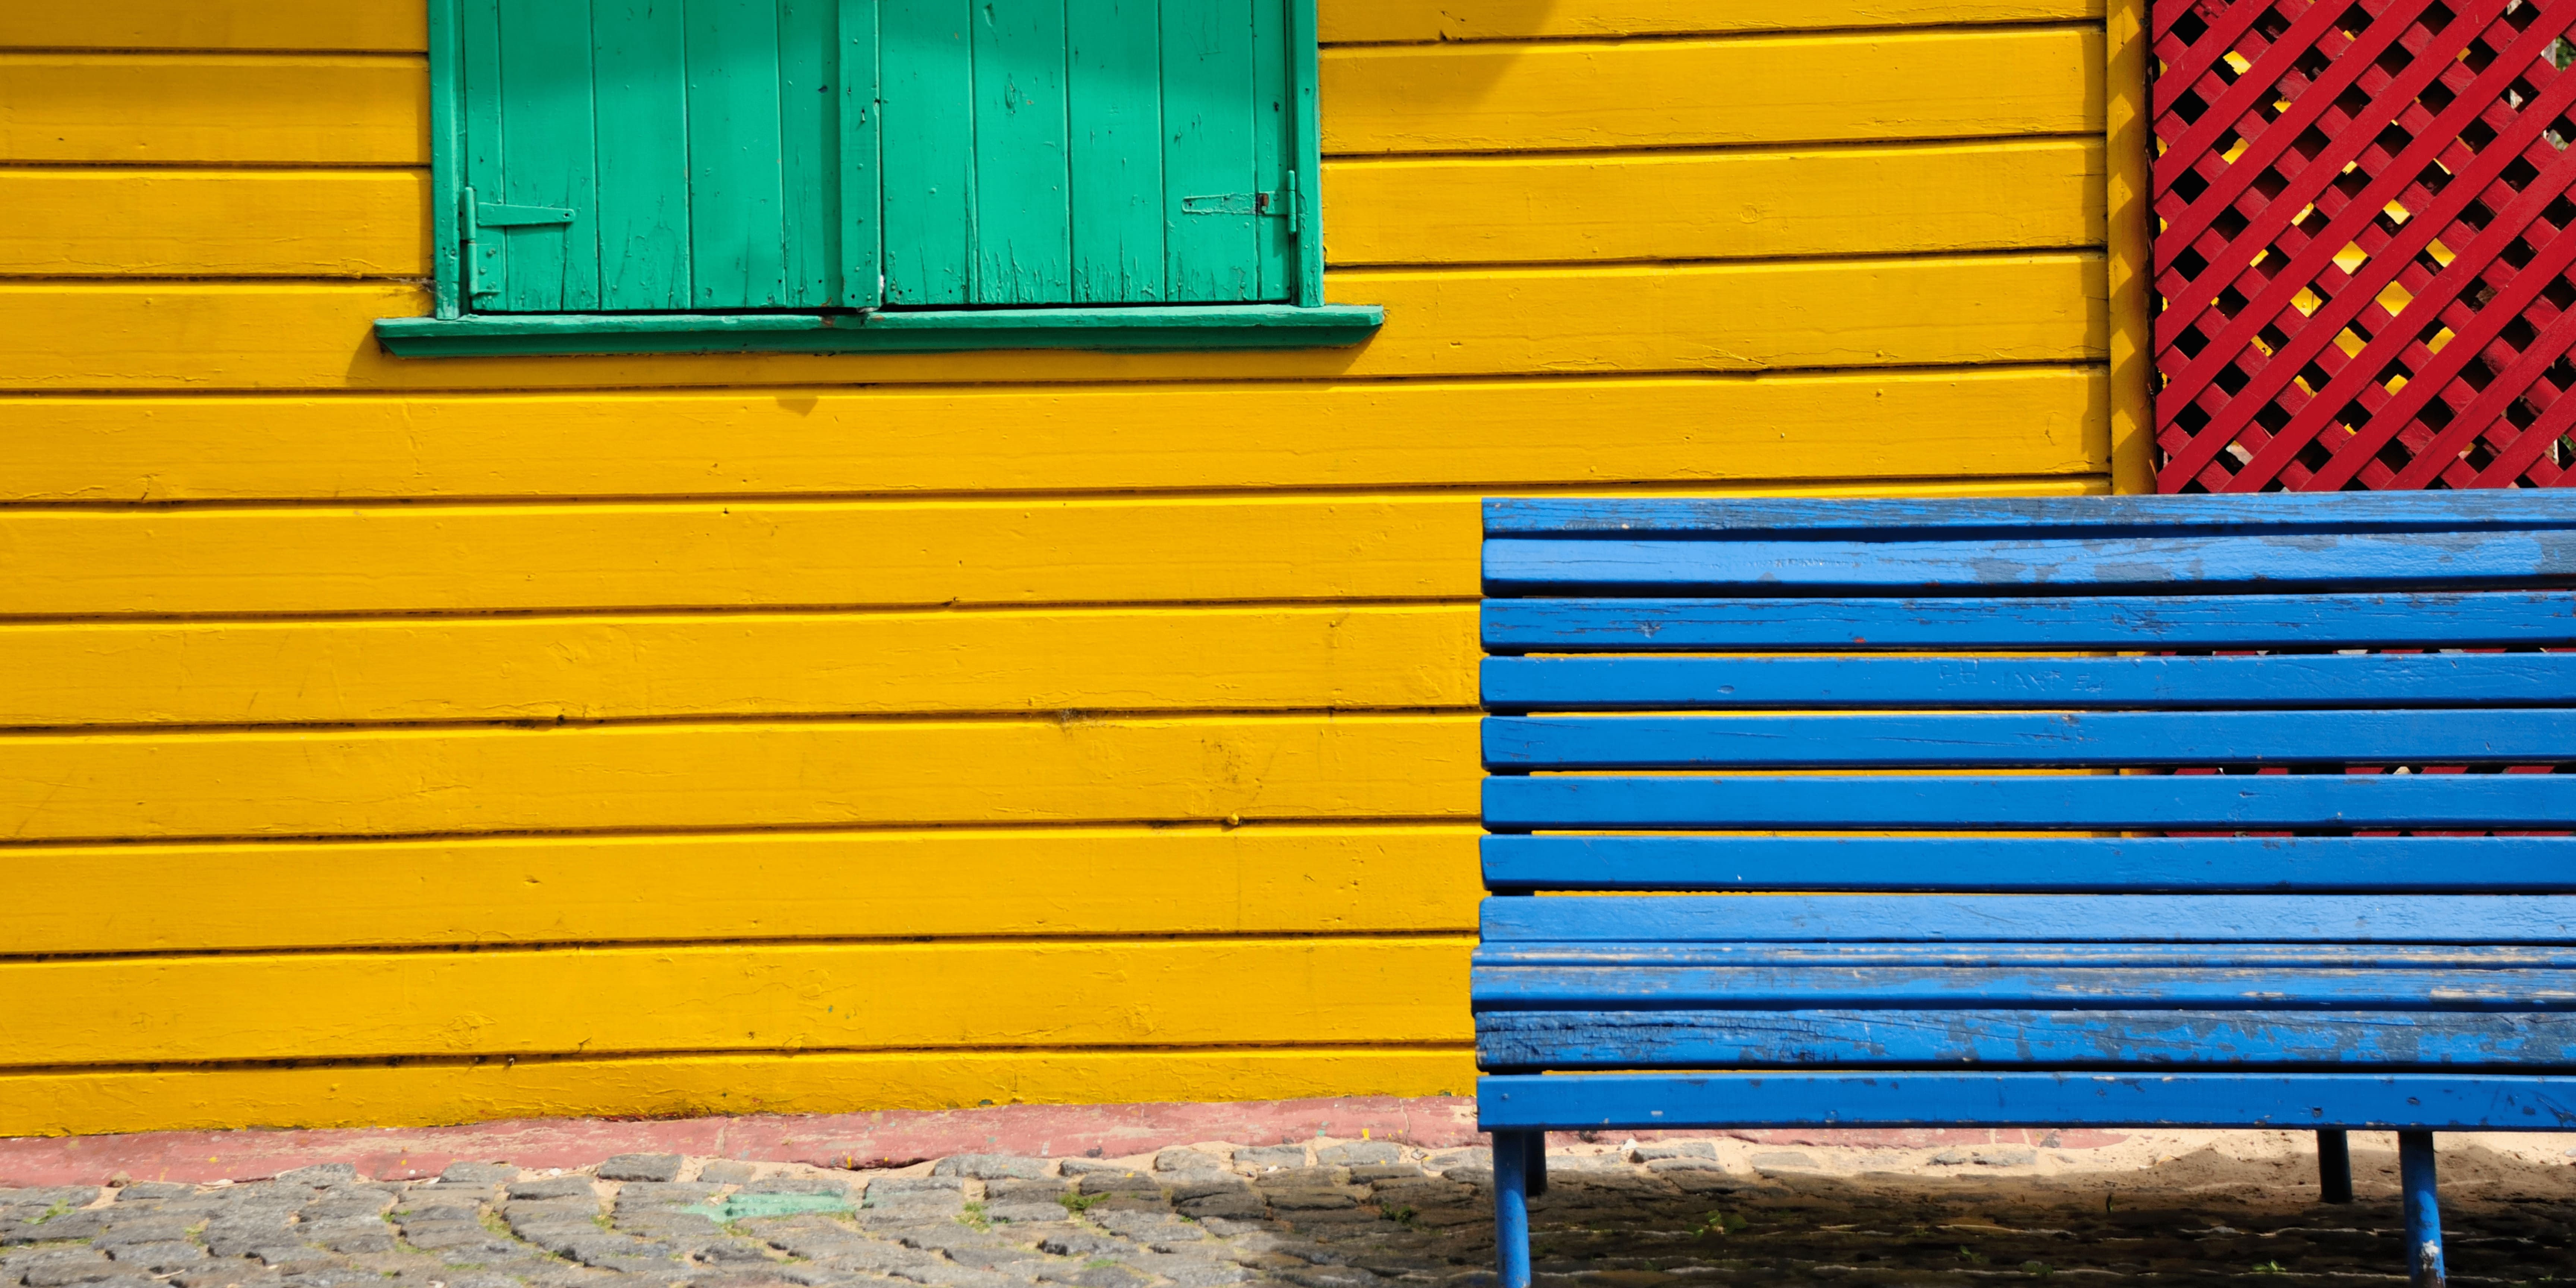 colorful background image of La Boca neighborhood in Buenos Aires.